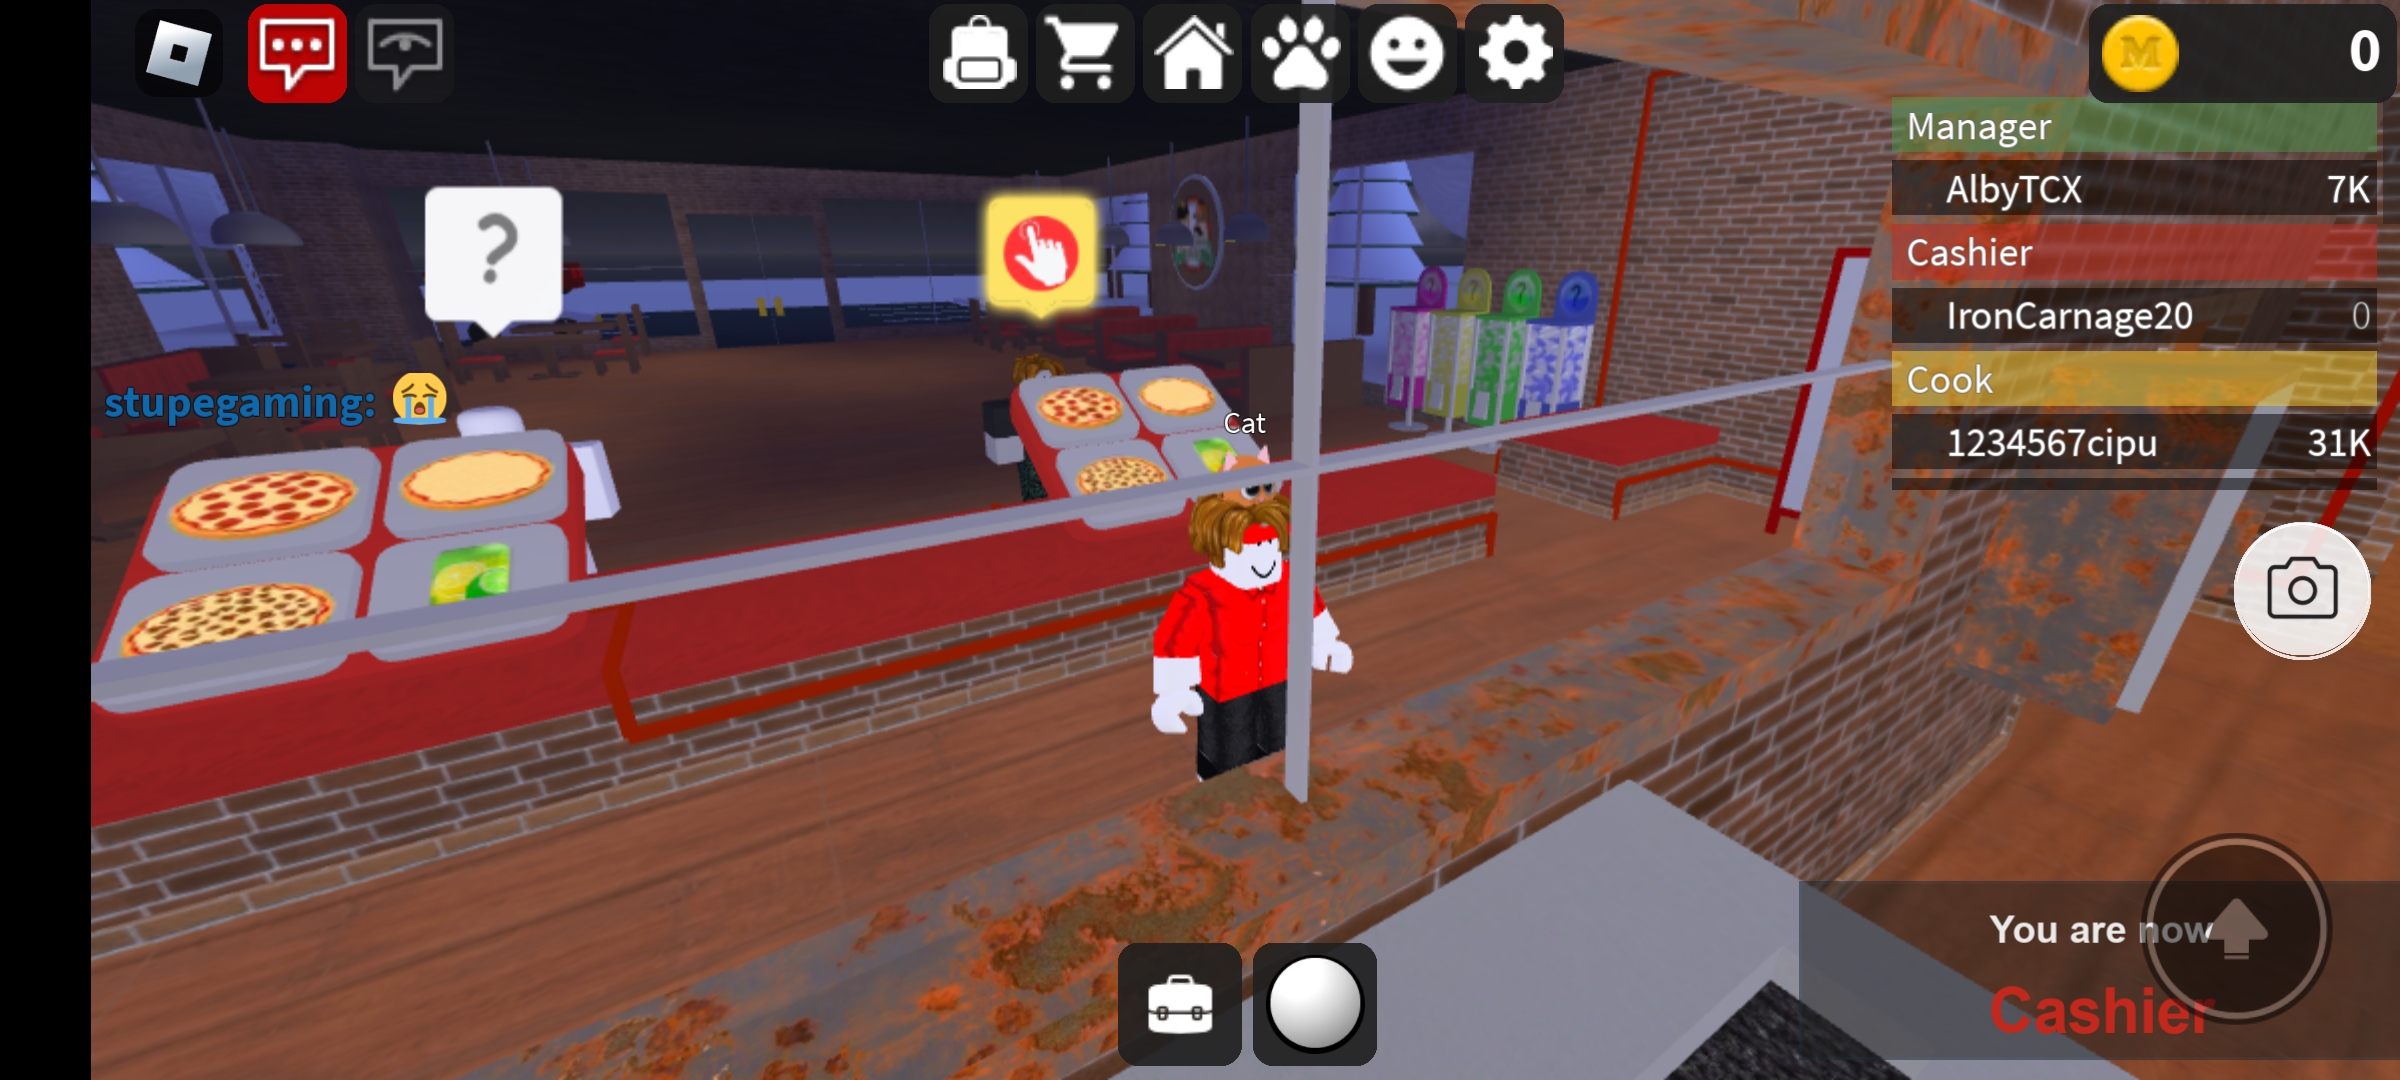 Best Roblox Games to Play With Your Friends